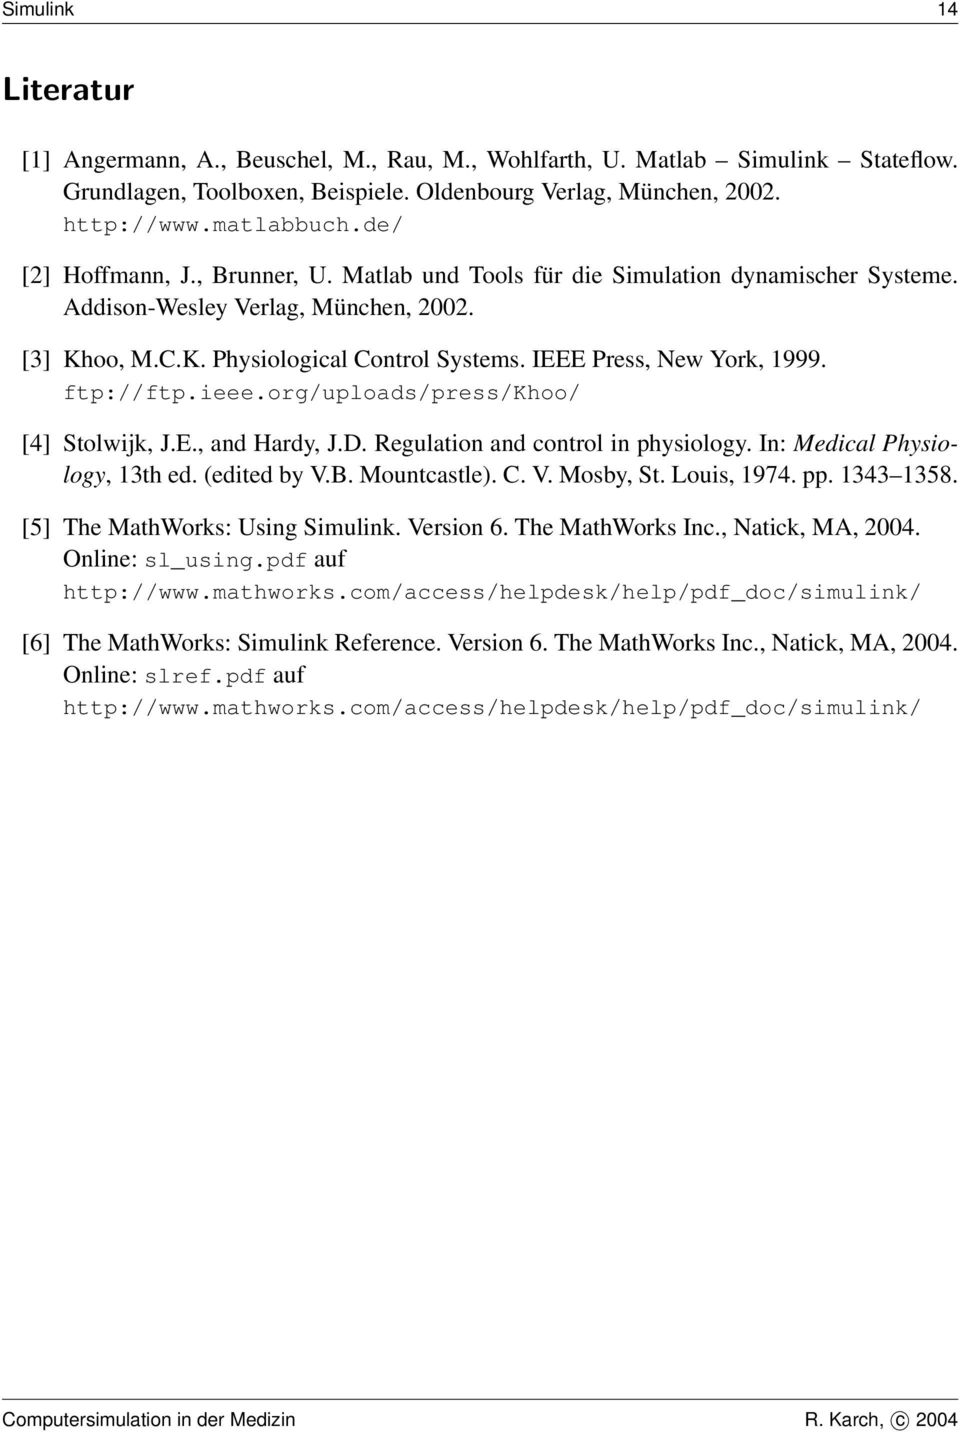 ftp://ftp.ieee.org/upload/pre/khoo/ [4] Stolwijk, J.E., and Hardy, J.D. Regulation and control in phyiology. In: Medical Phyiology, 3th ed. (edited by V.B. Mountcatle). C. V. Moby, St. Loui, 974. pp.